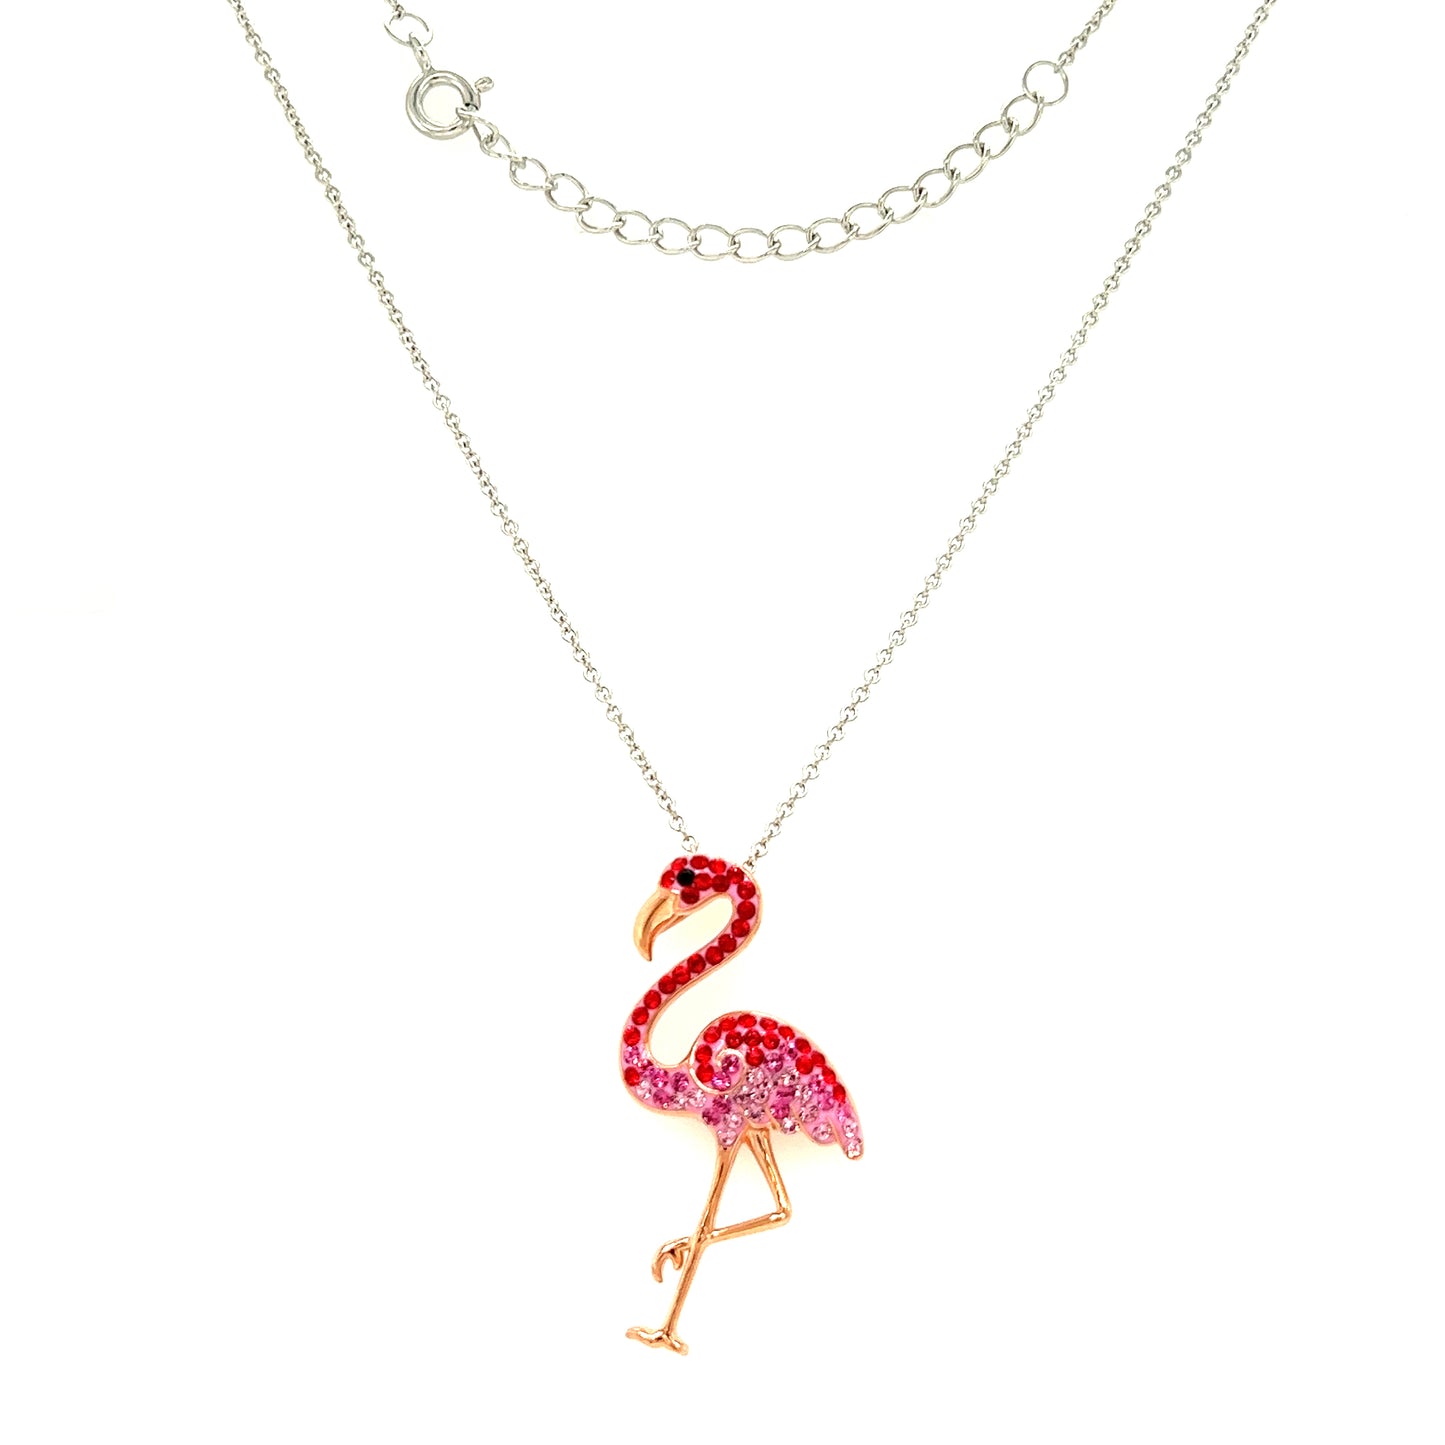 Flamingo Necklace with Red and Pink Crystals and Rose Gold Plating in Sterling Silver Full Necklace Front View